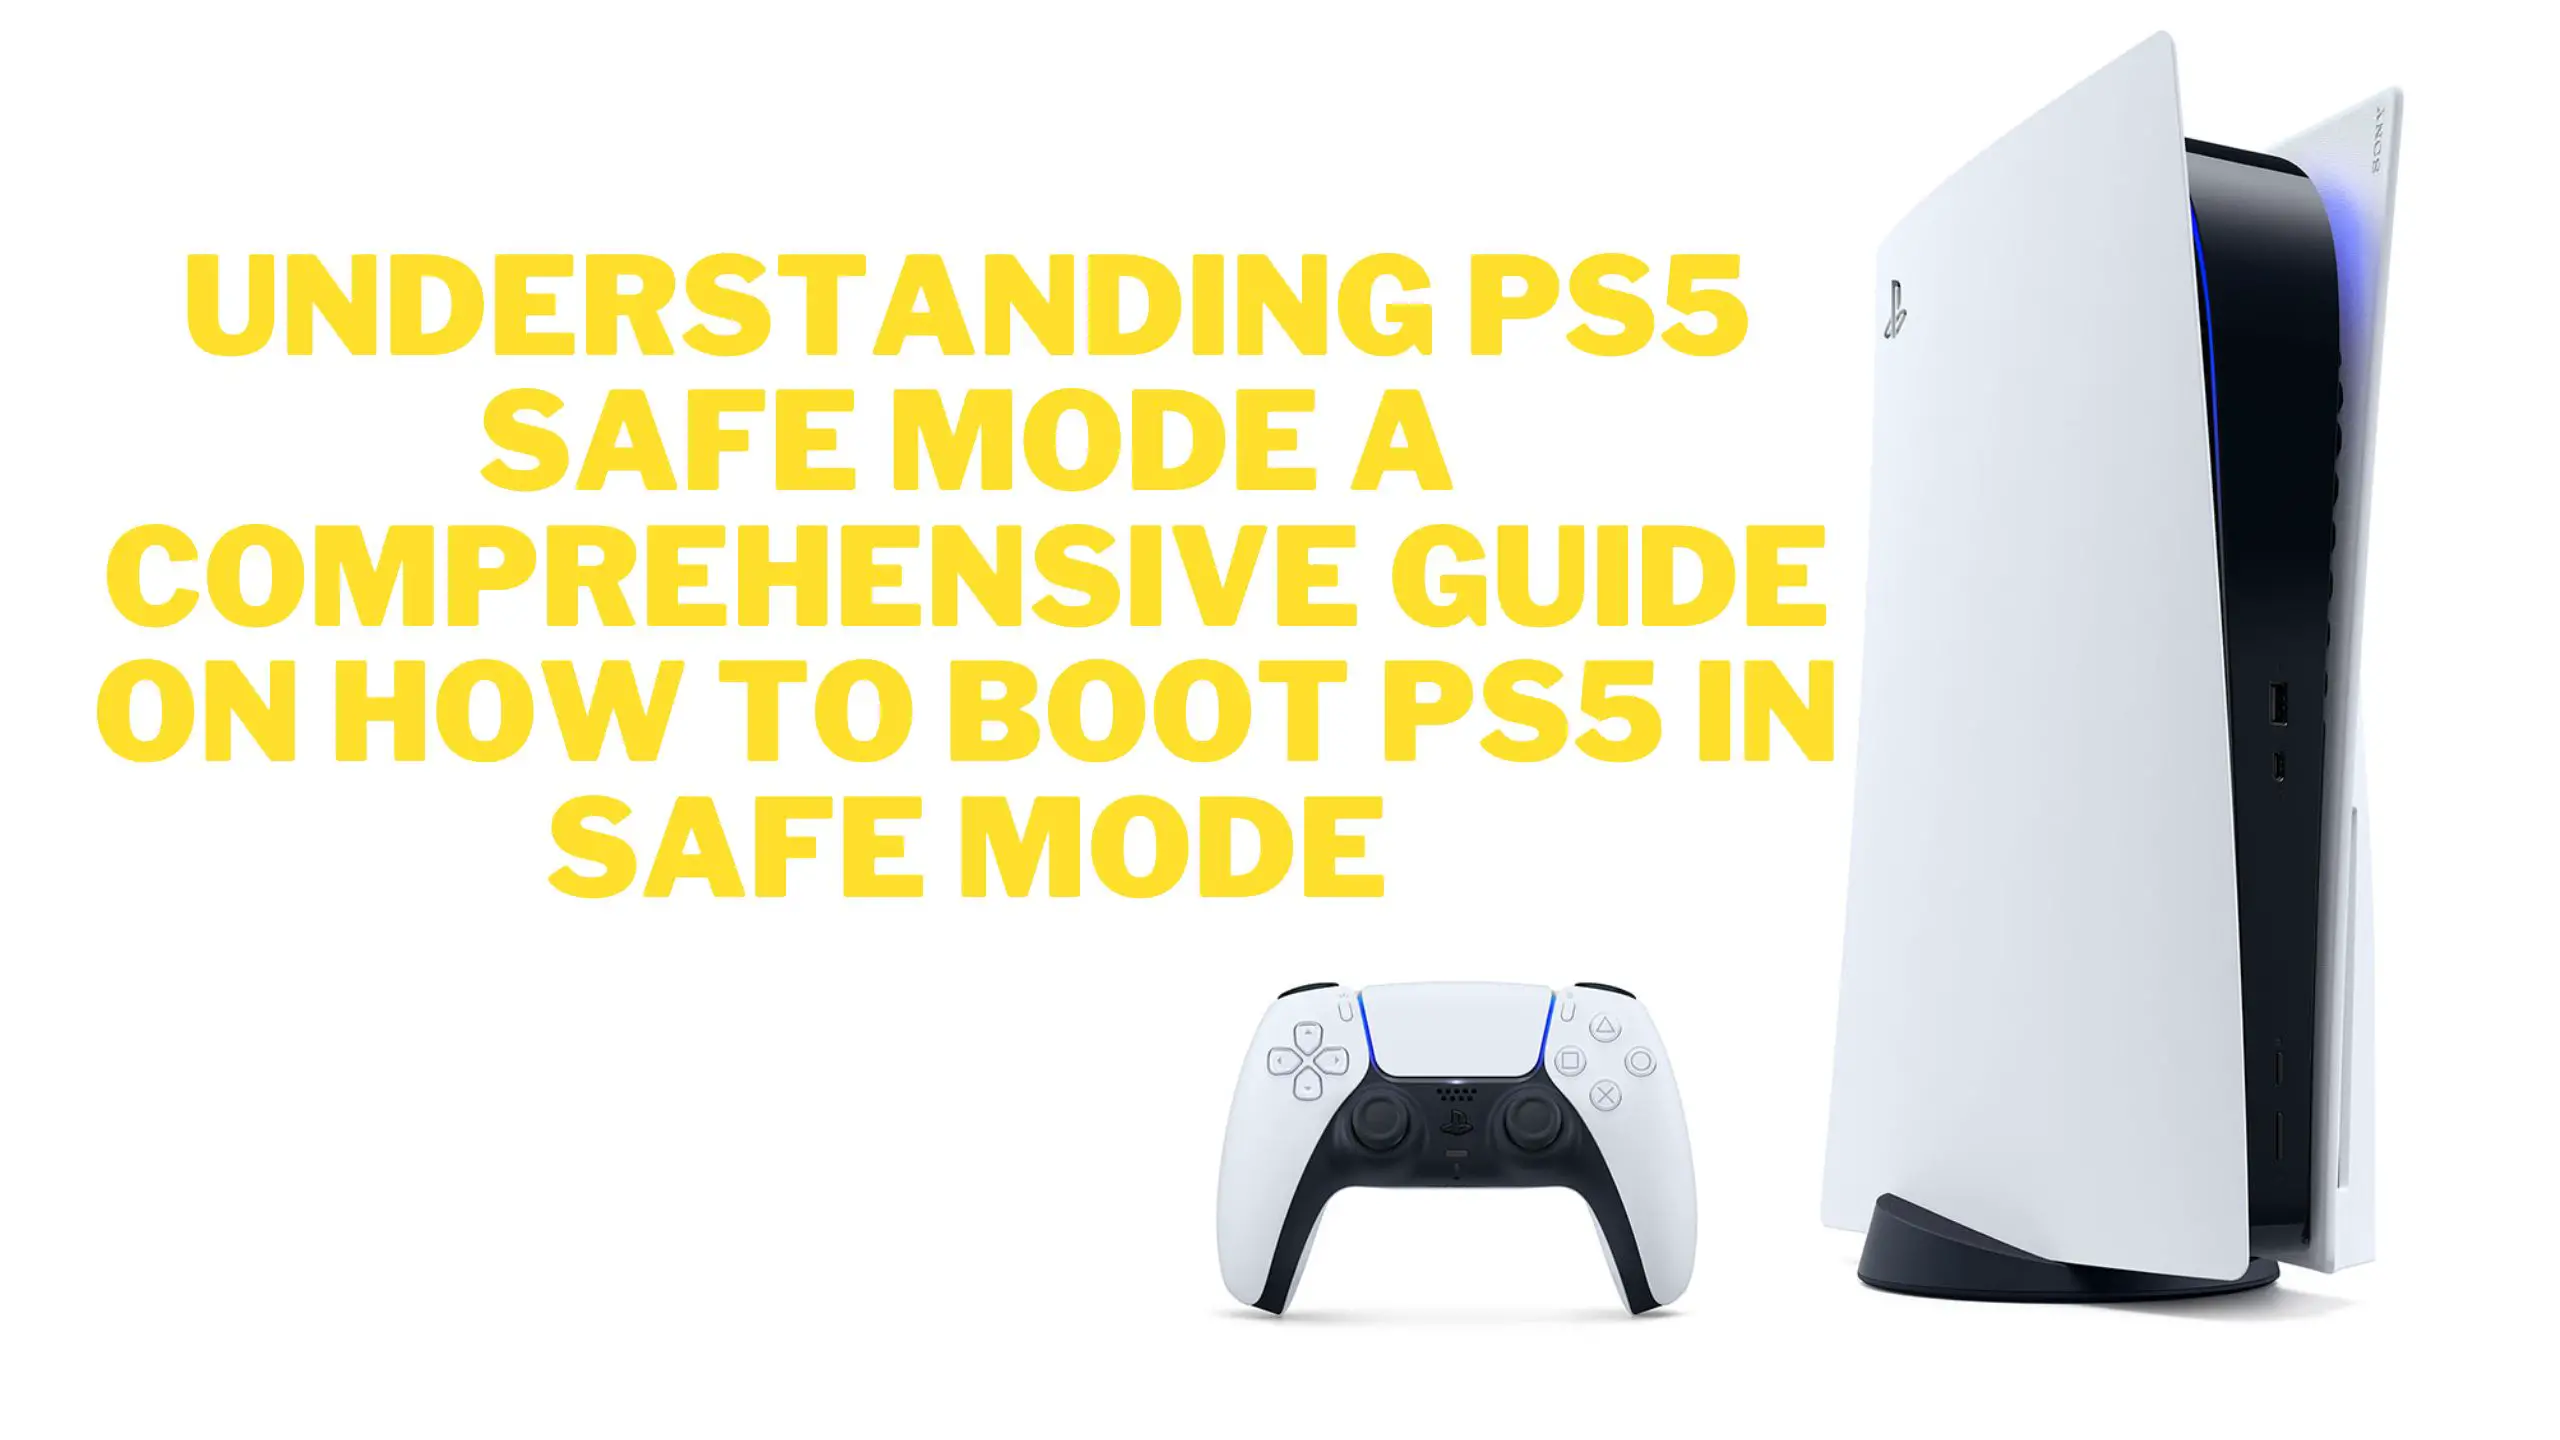 Understanding PS5 Safe Mode A Comprehensive Guide on How to Boot PS5 In Safe Mode